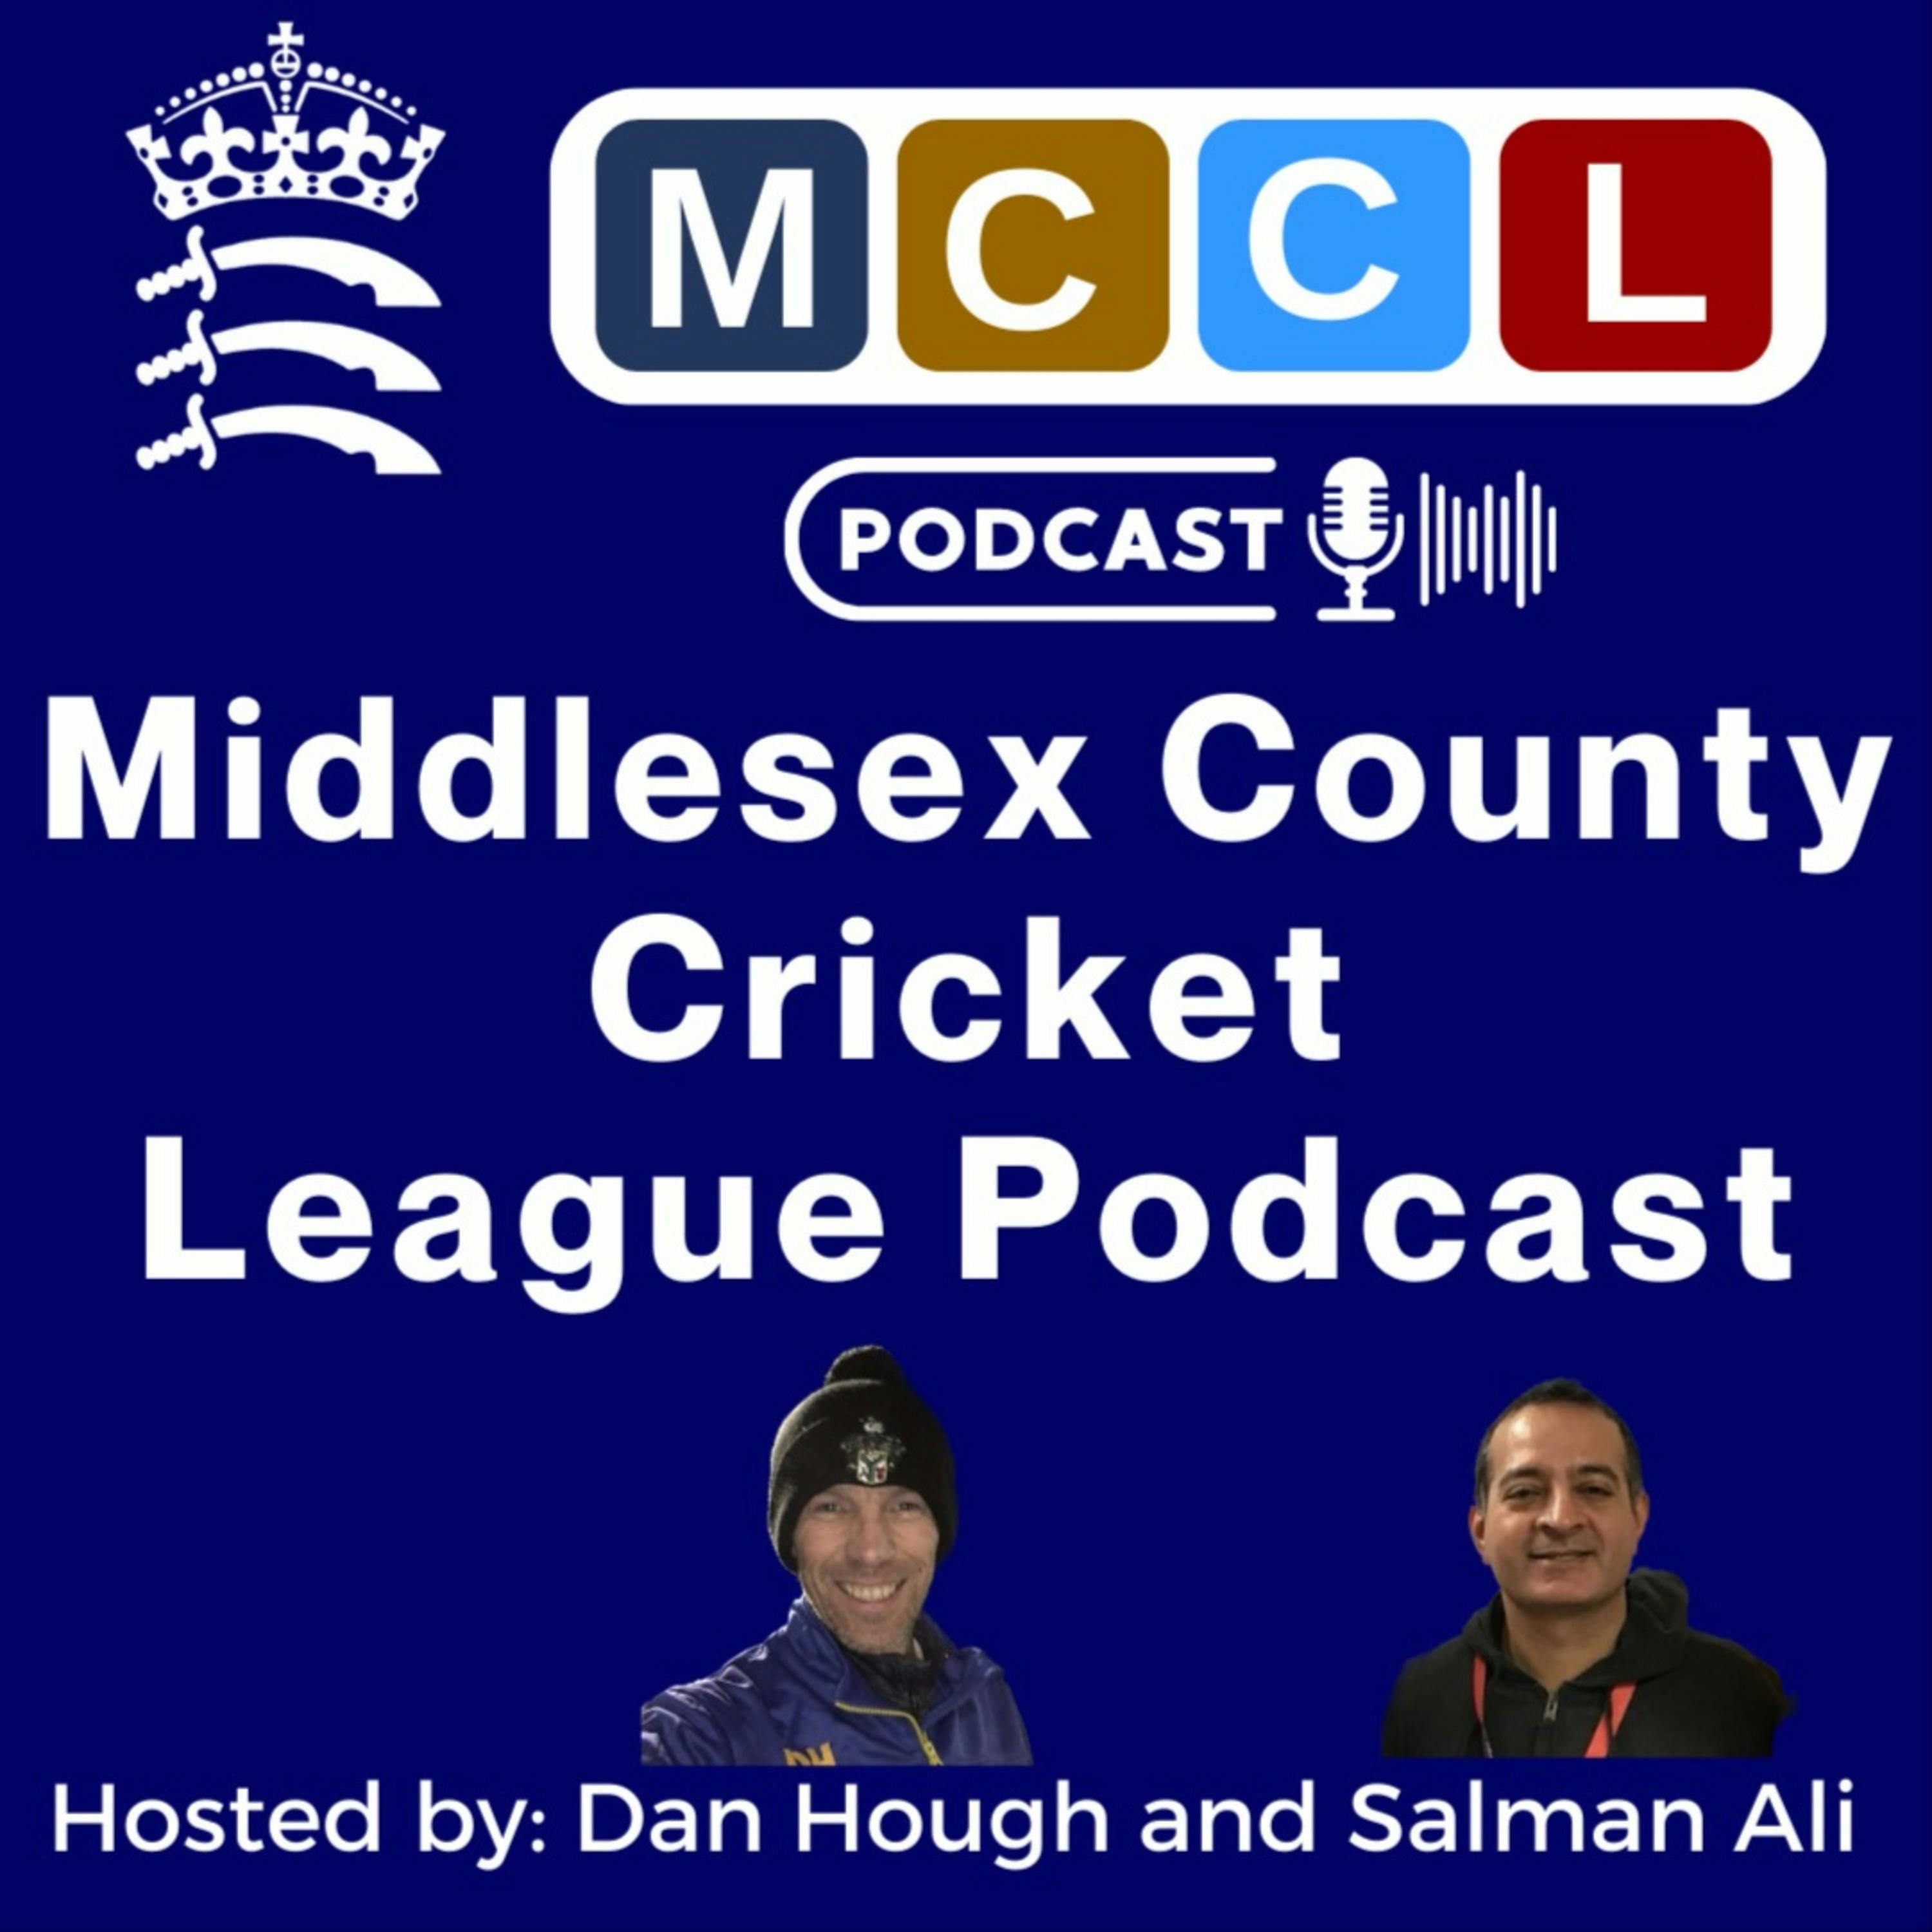 Welcome to the MCCL Podcast